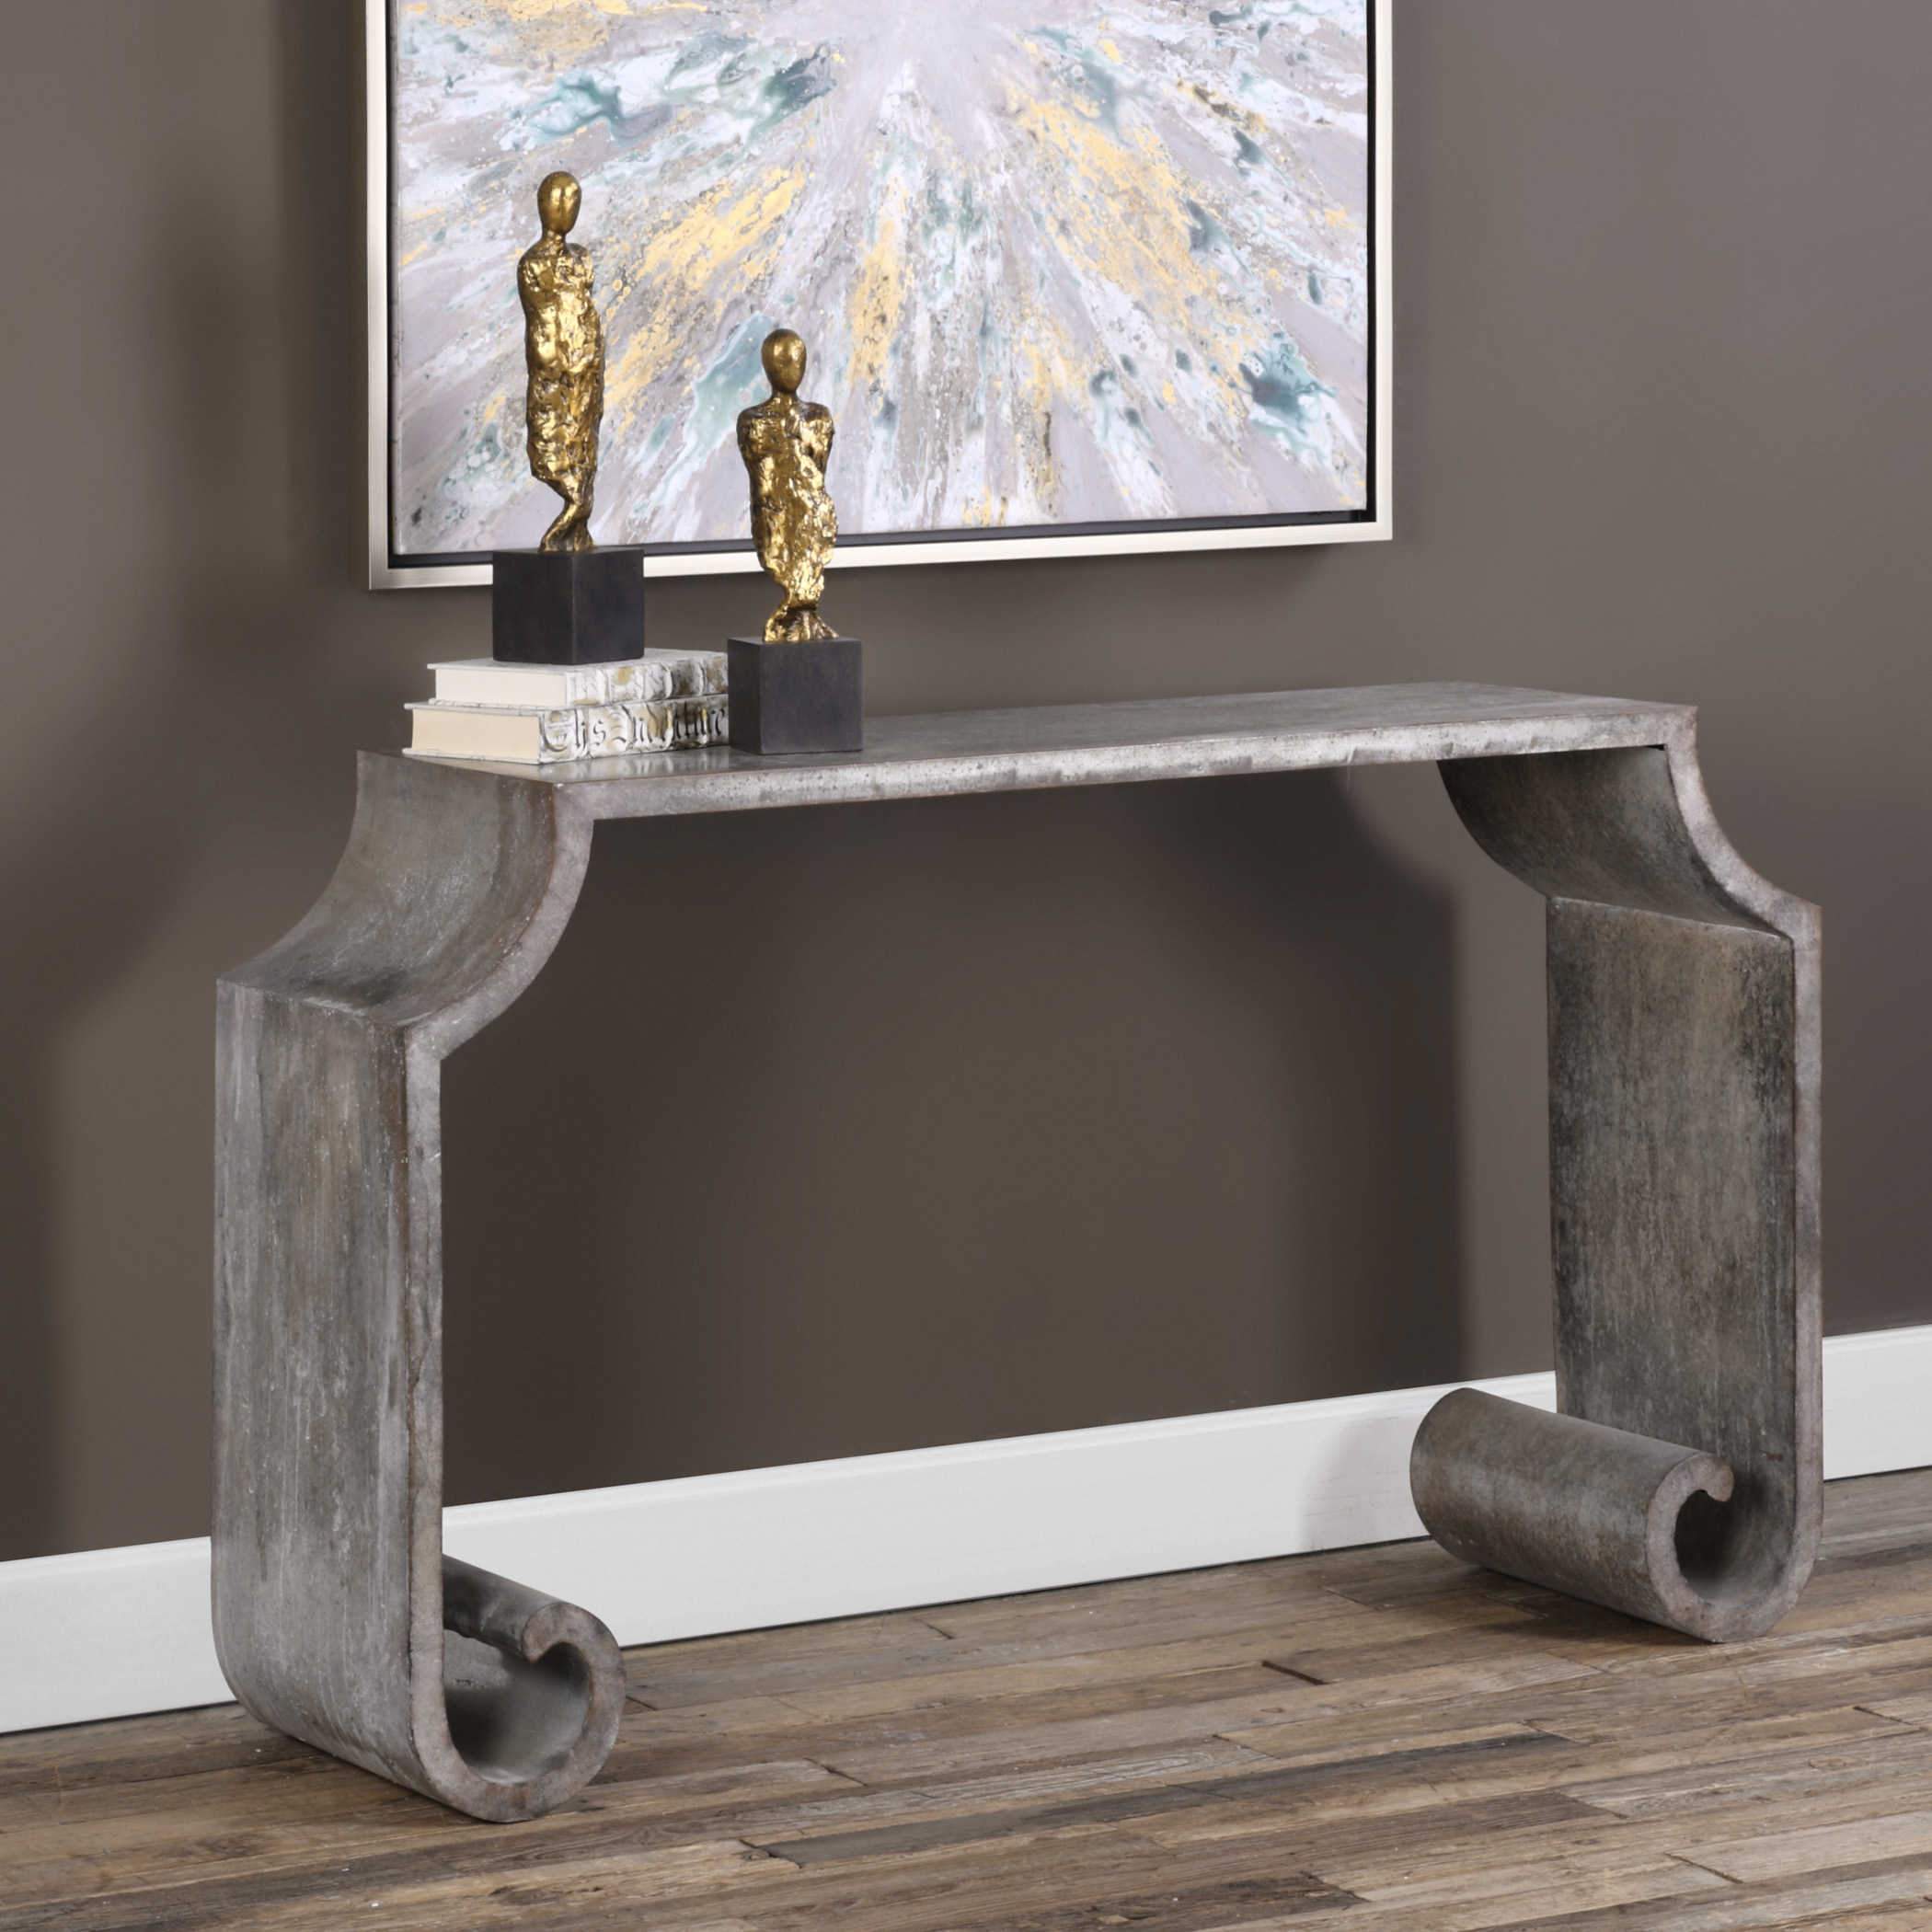 Uttermost Home Motor Freight - Rate to be Quoted Uttermost Agathon Console Table